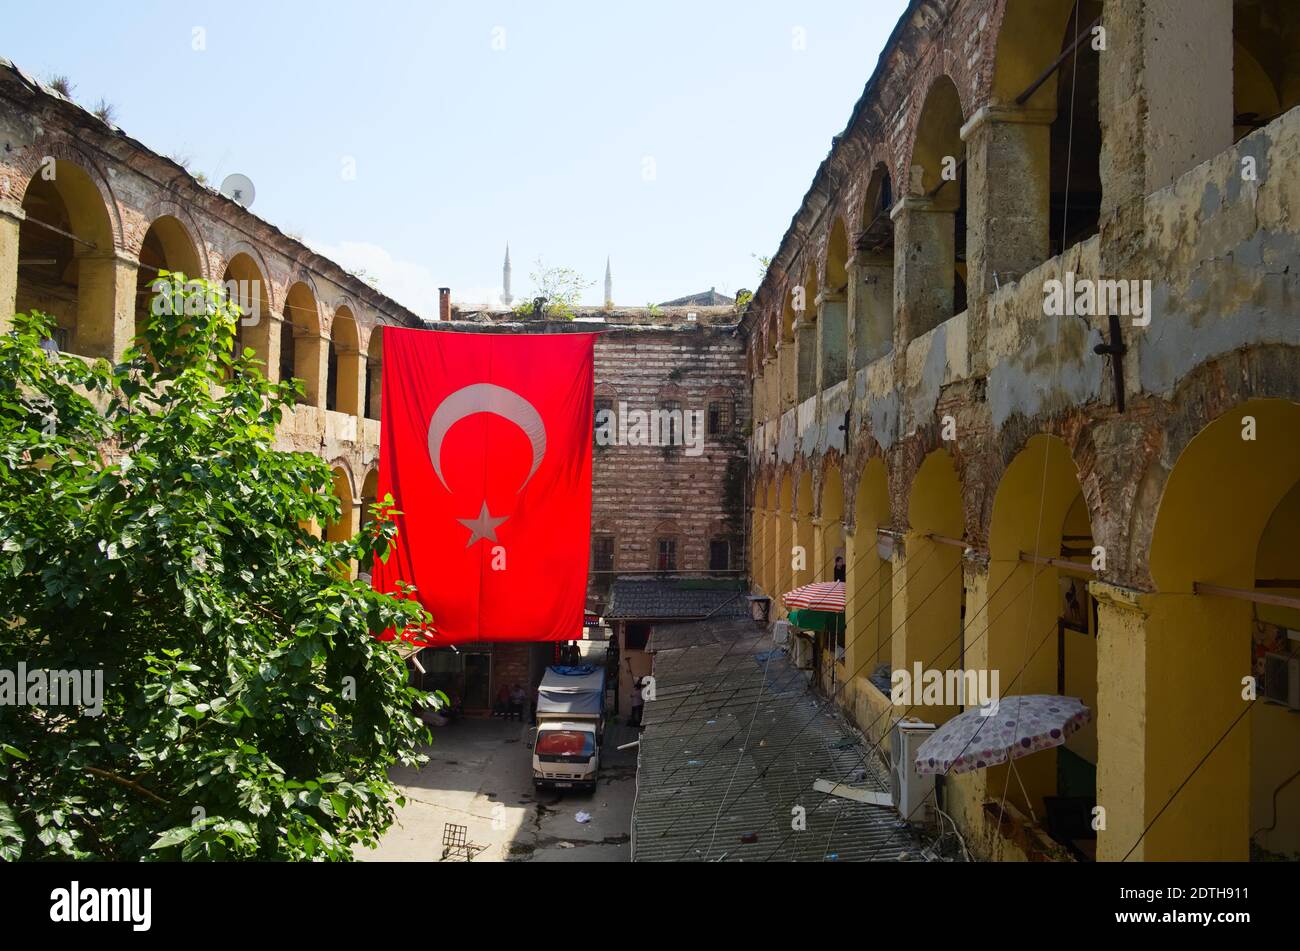 Istanbul, Turkey - September, 2018: Large hanging Turkish flag in the courtyard of old historic building on Grand Bazaar in Istanbul. Stock Photo